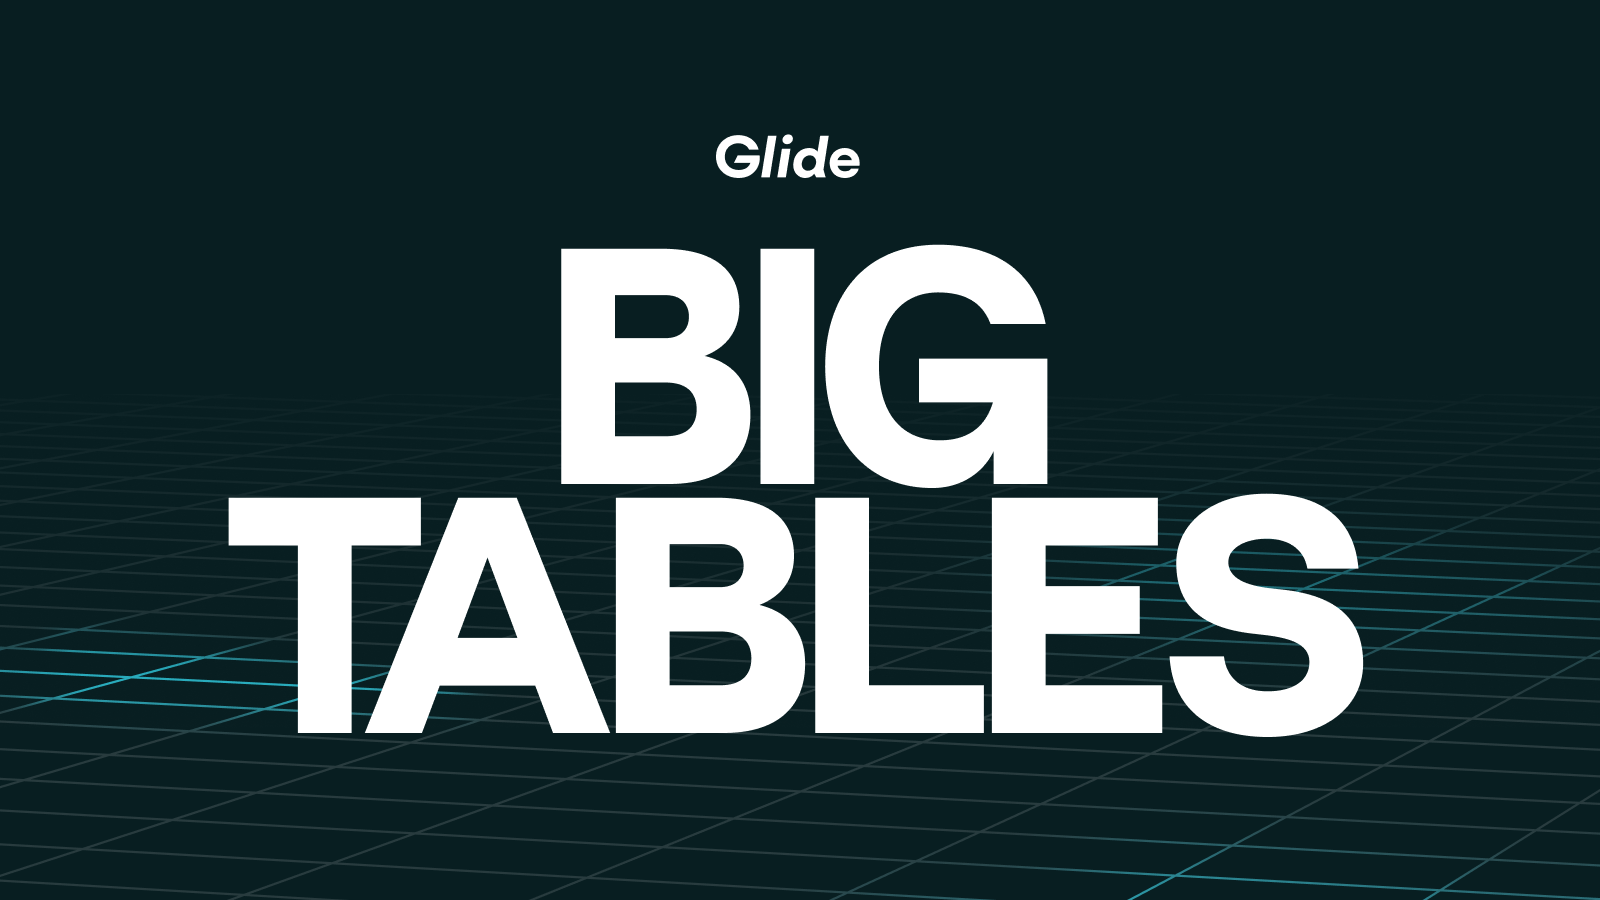 Big Tables is now available